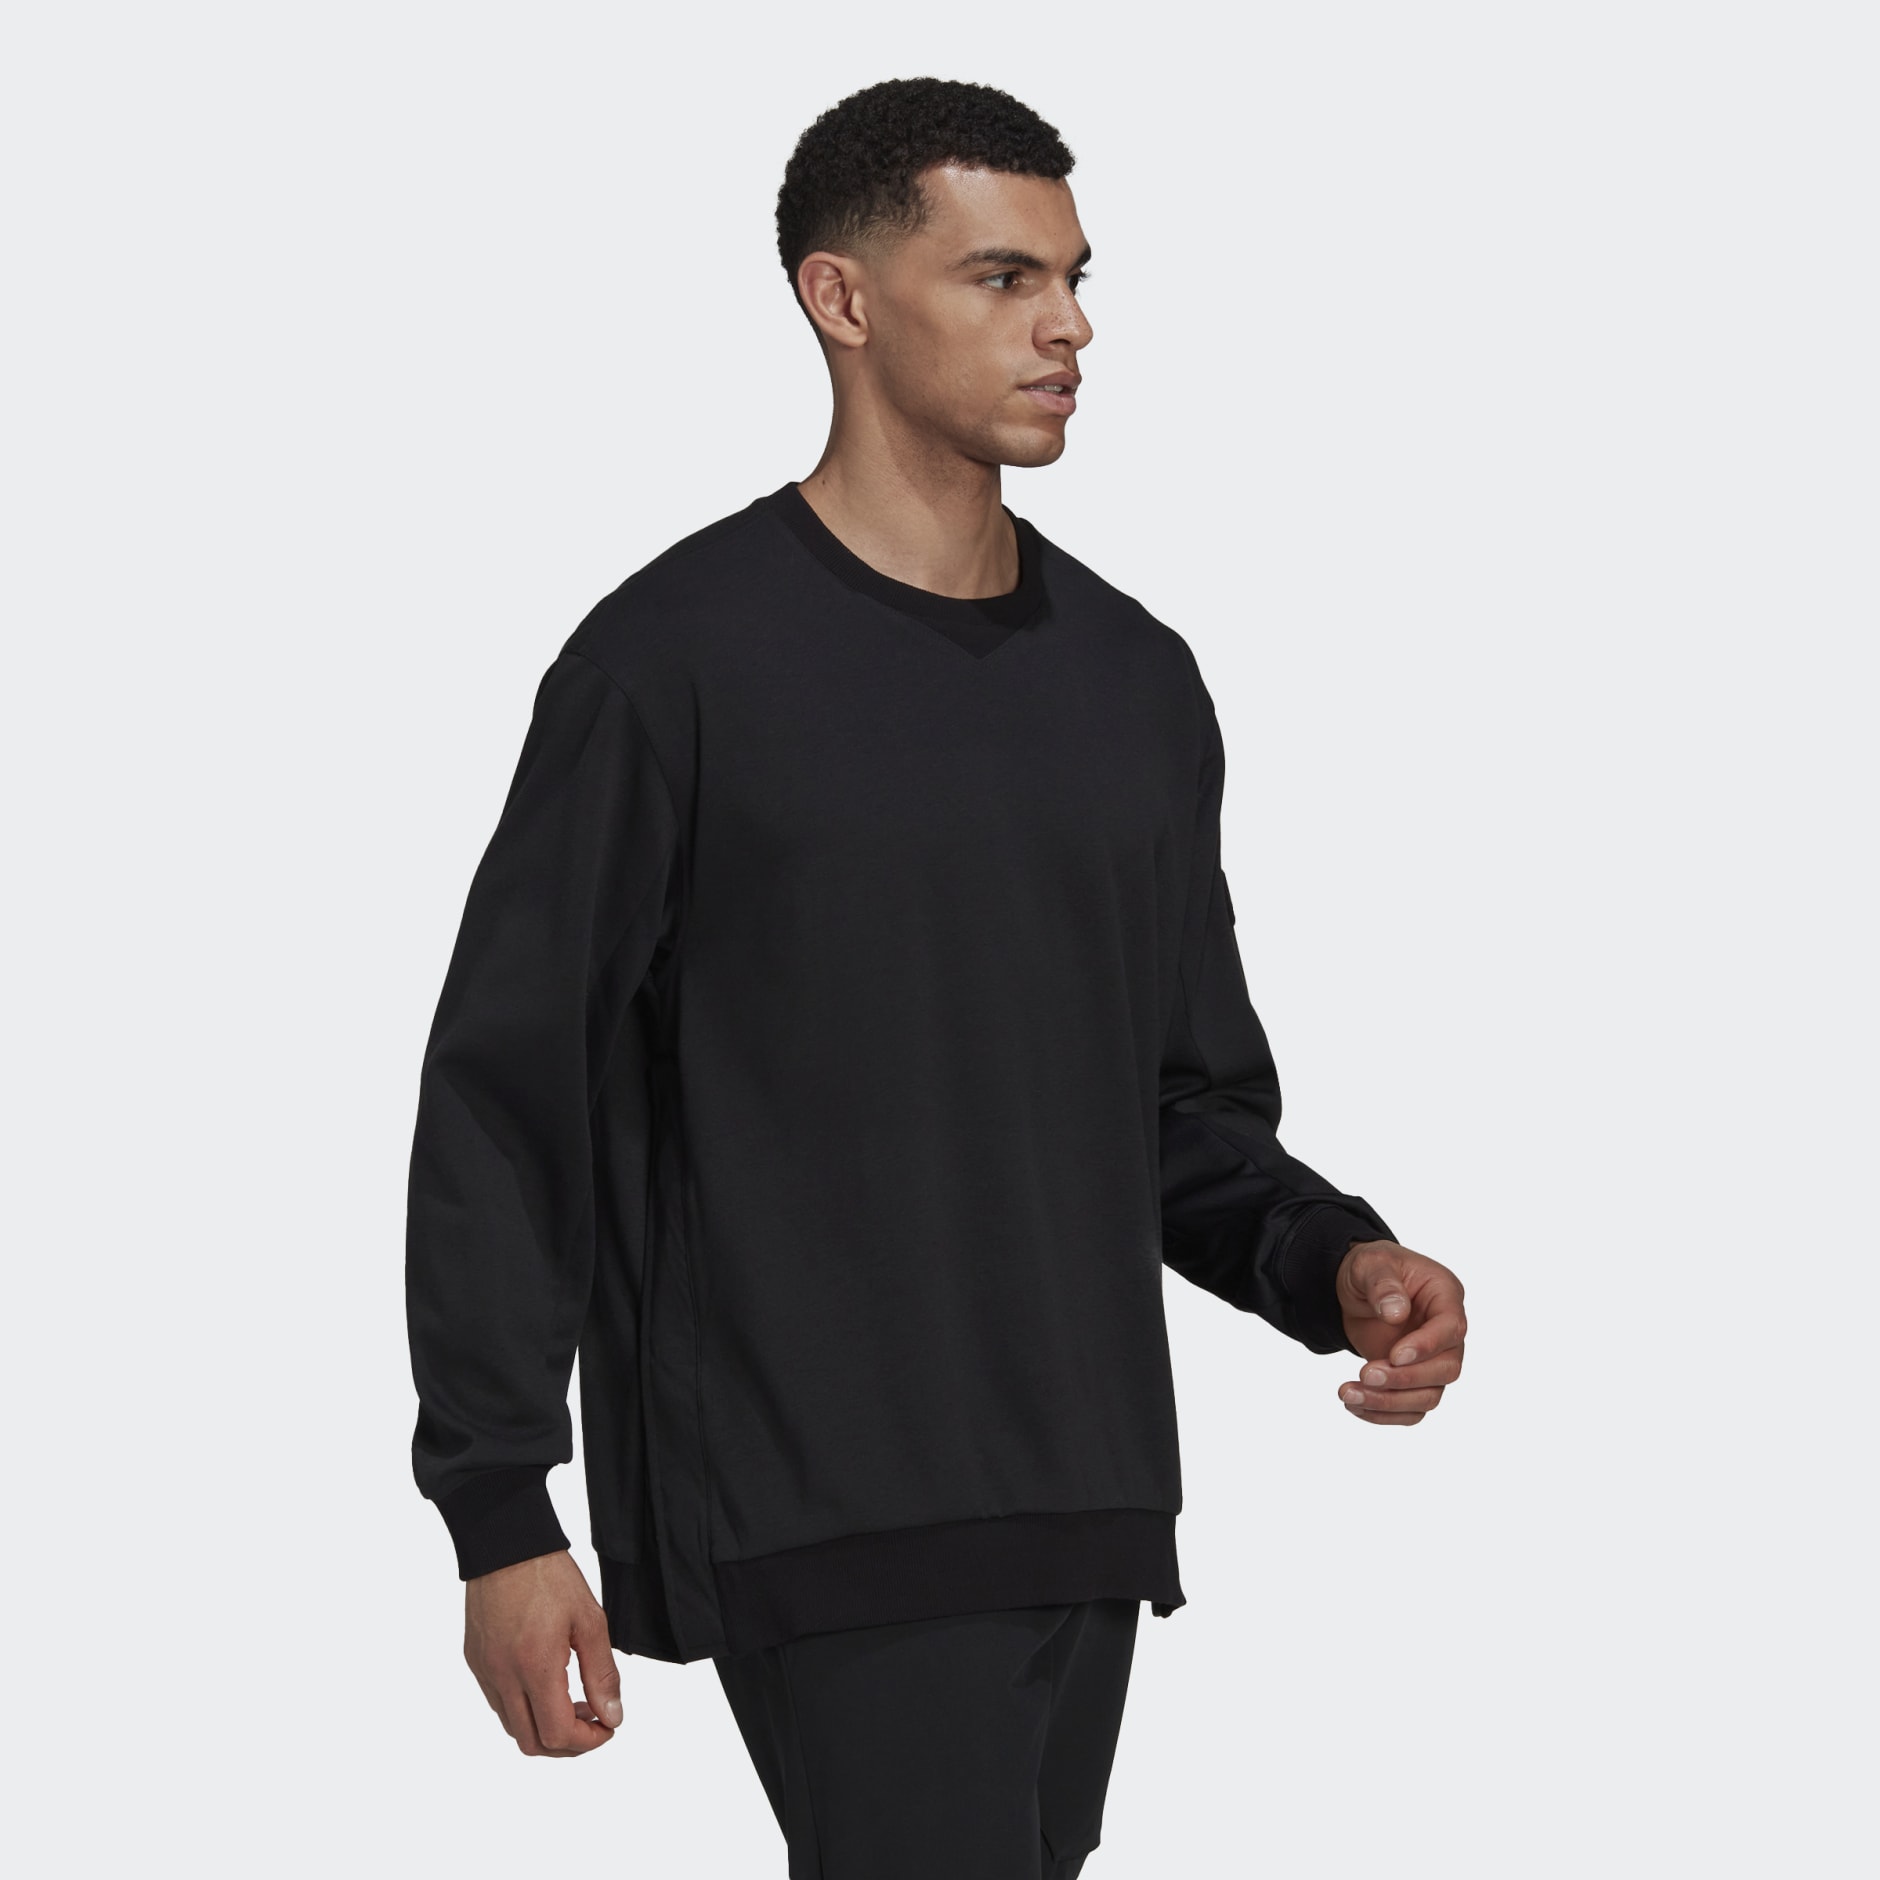 Clothing - Parley Run for the Oceans Sweatshirt - Black | adidas South ...